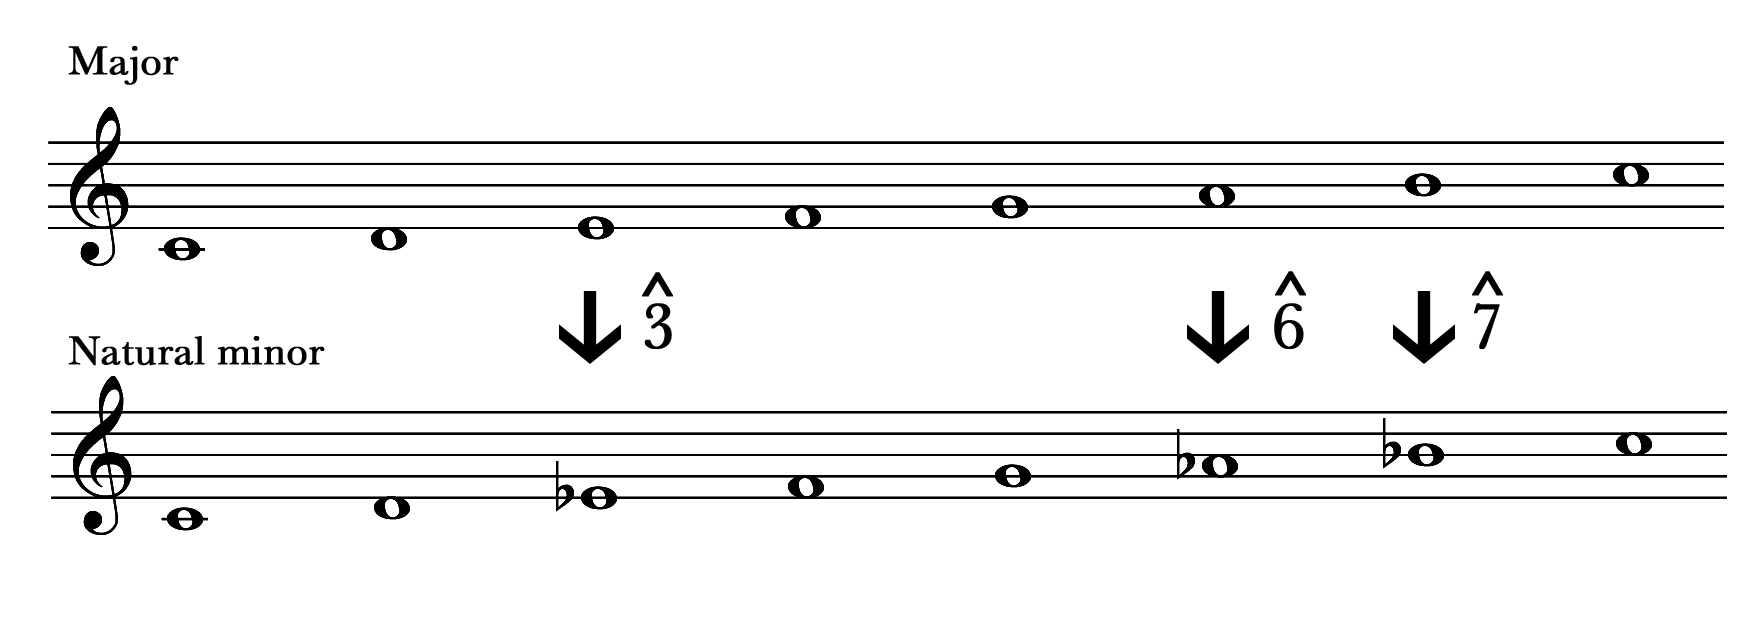 A C major and C natural minor scale compared.